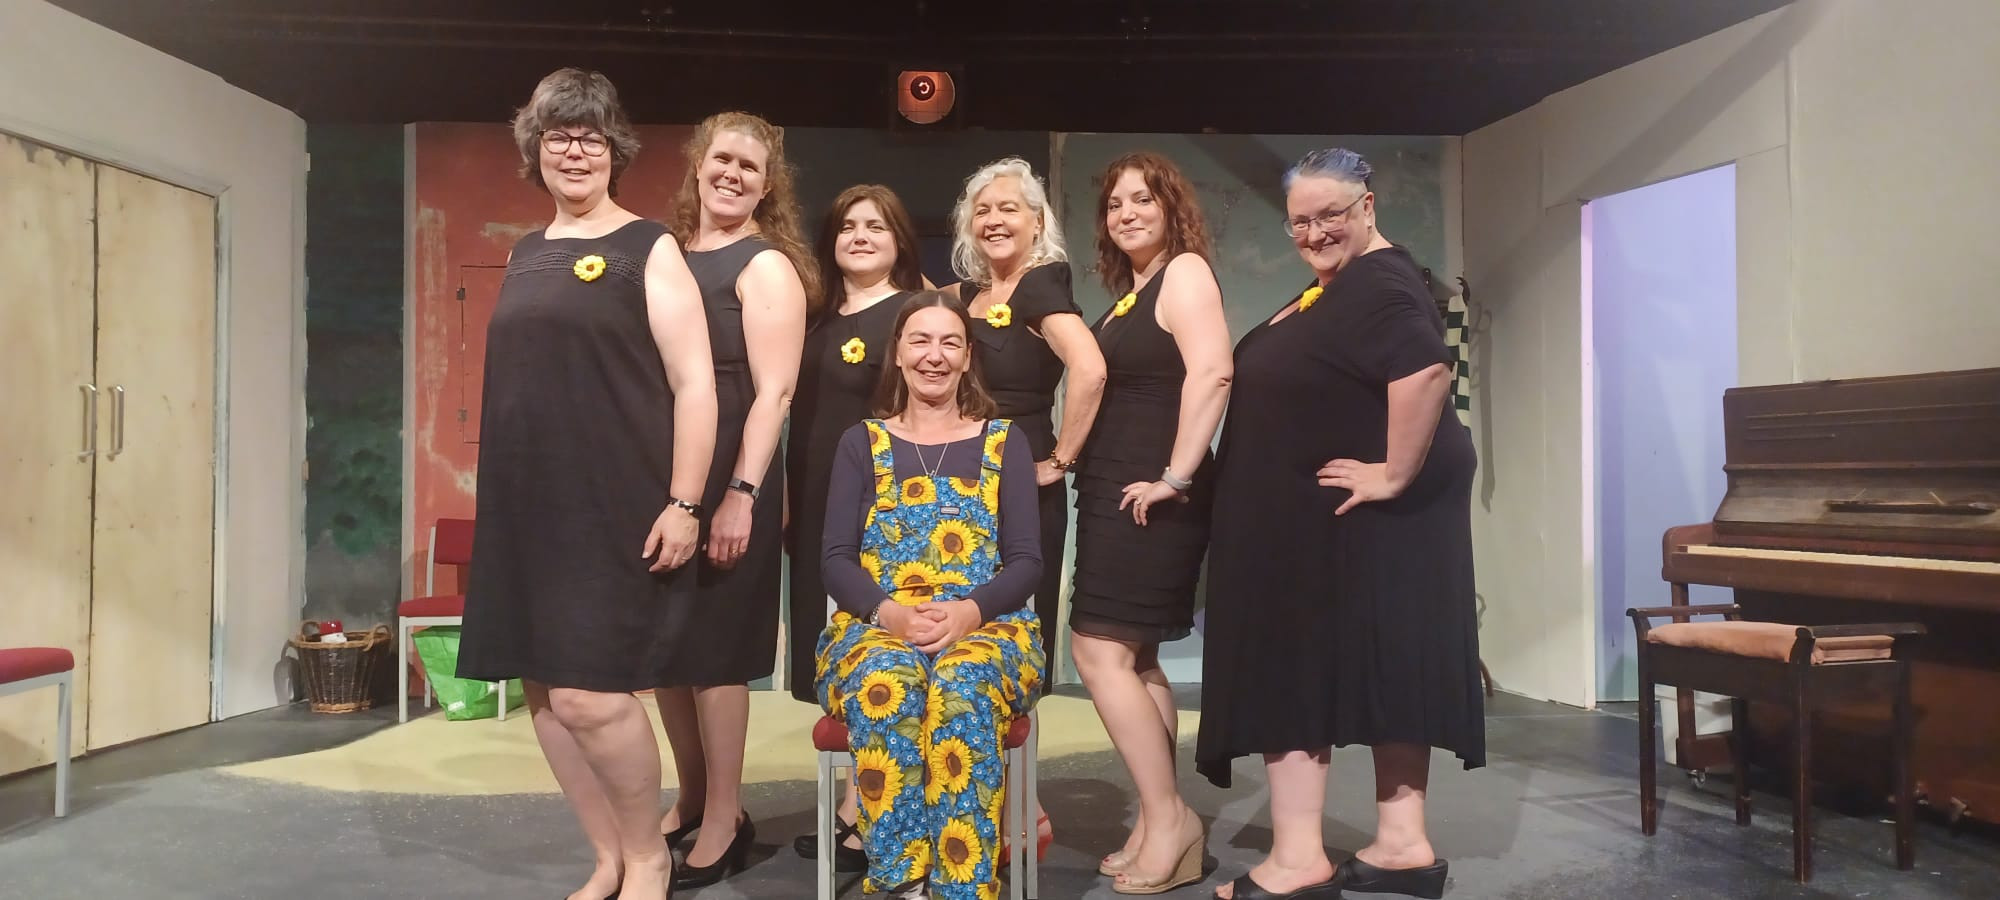 Andrea Oliver and the six main cast members of the production of Calendar Girls at the Arden Theatre in Faversham. Adrea is sitting on a chair wearing dungarees made from a sunflower material, and the six women are standing behind her wearing black dresses with crochet sunflower brooches